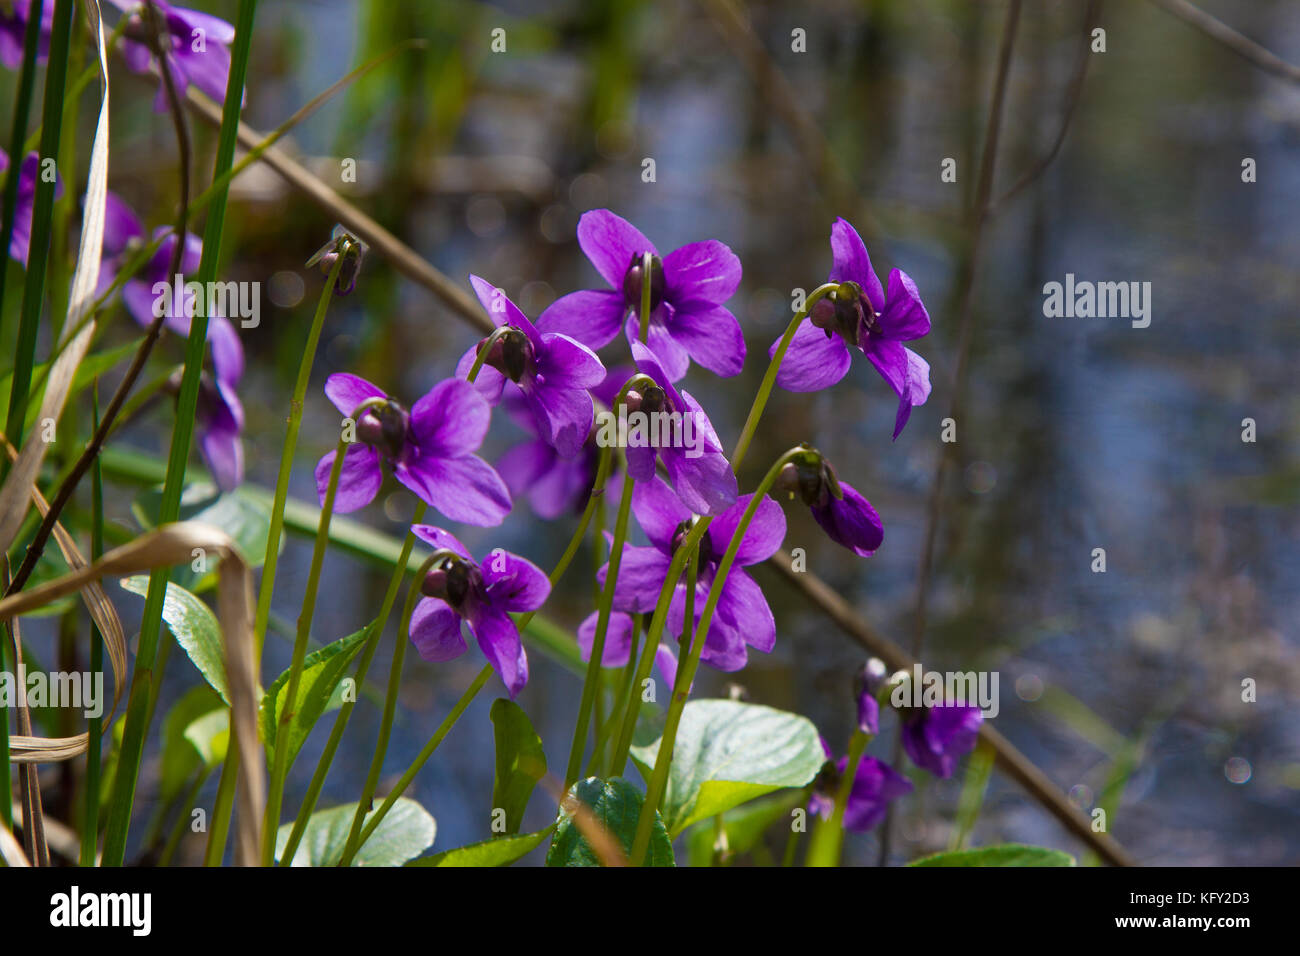 Spring nature common violets background. Viola Odorata flowers in the garden close up. Selective focus Stock Photo